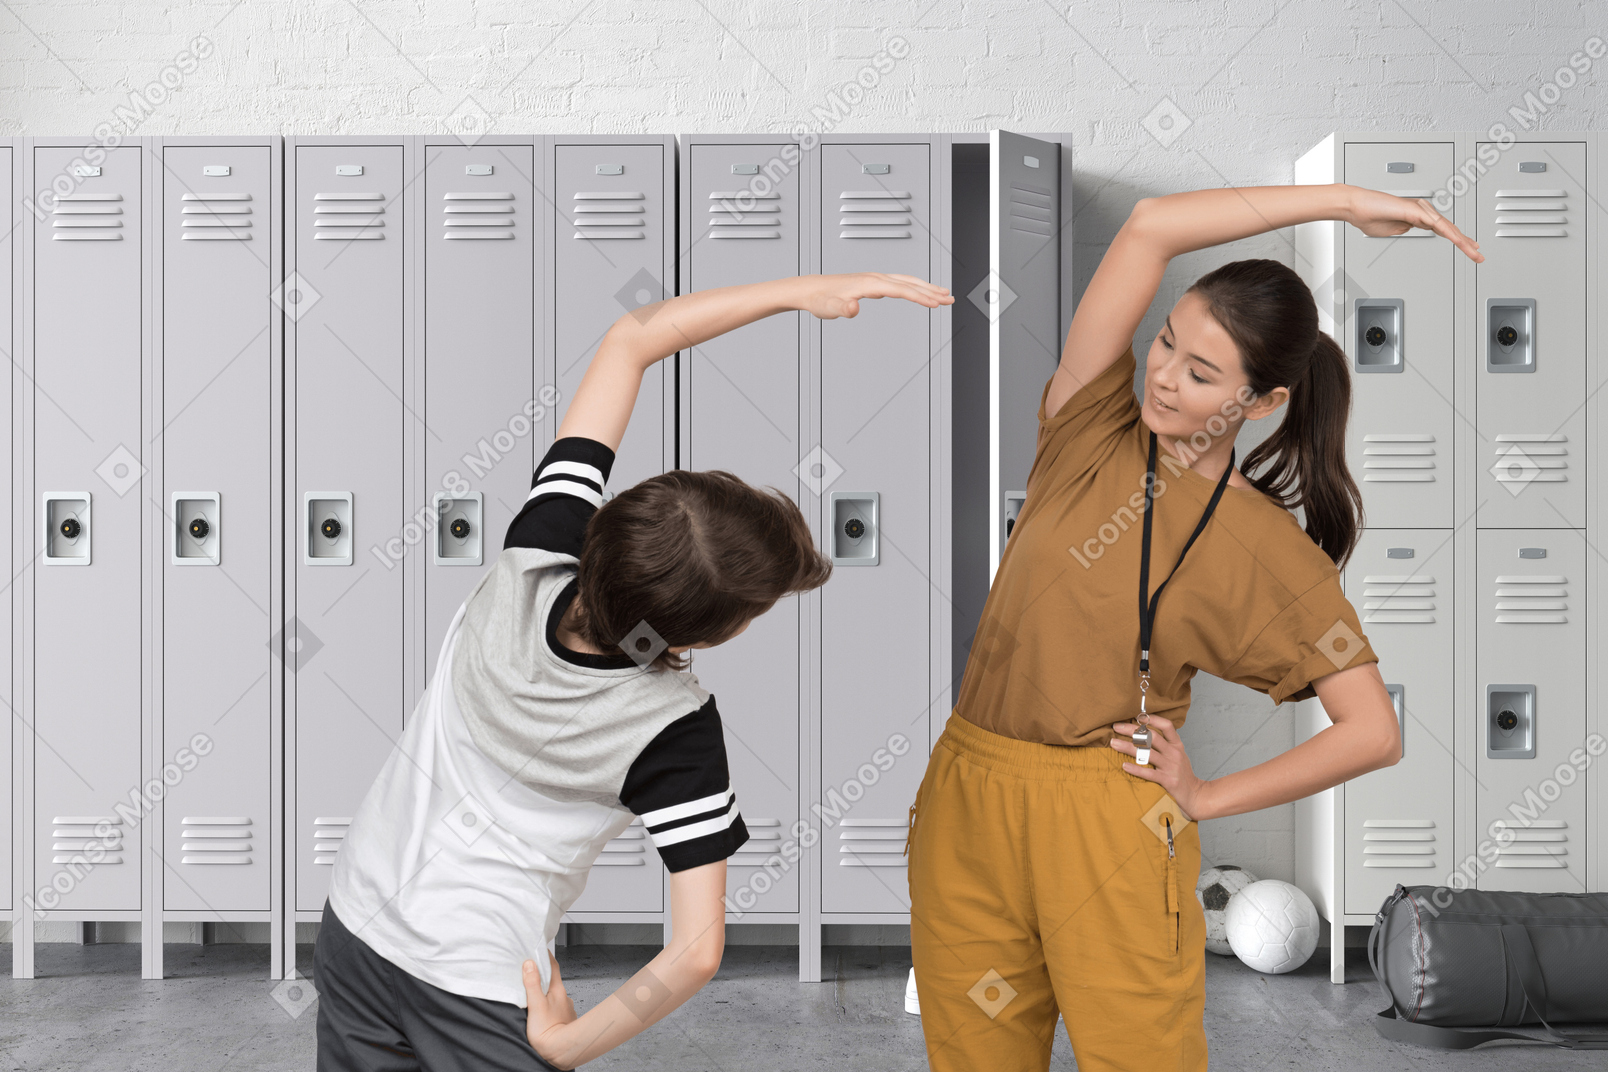 Female trainer exercising with boy in locker room